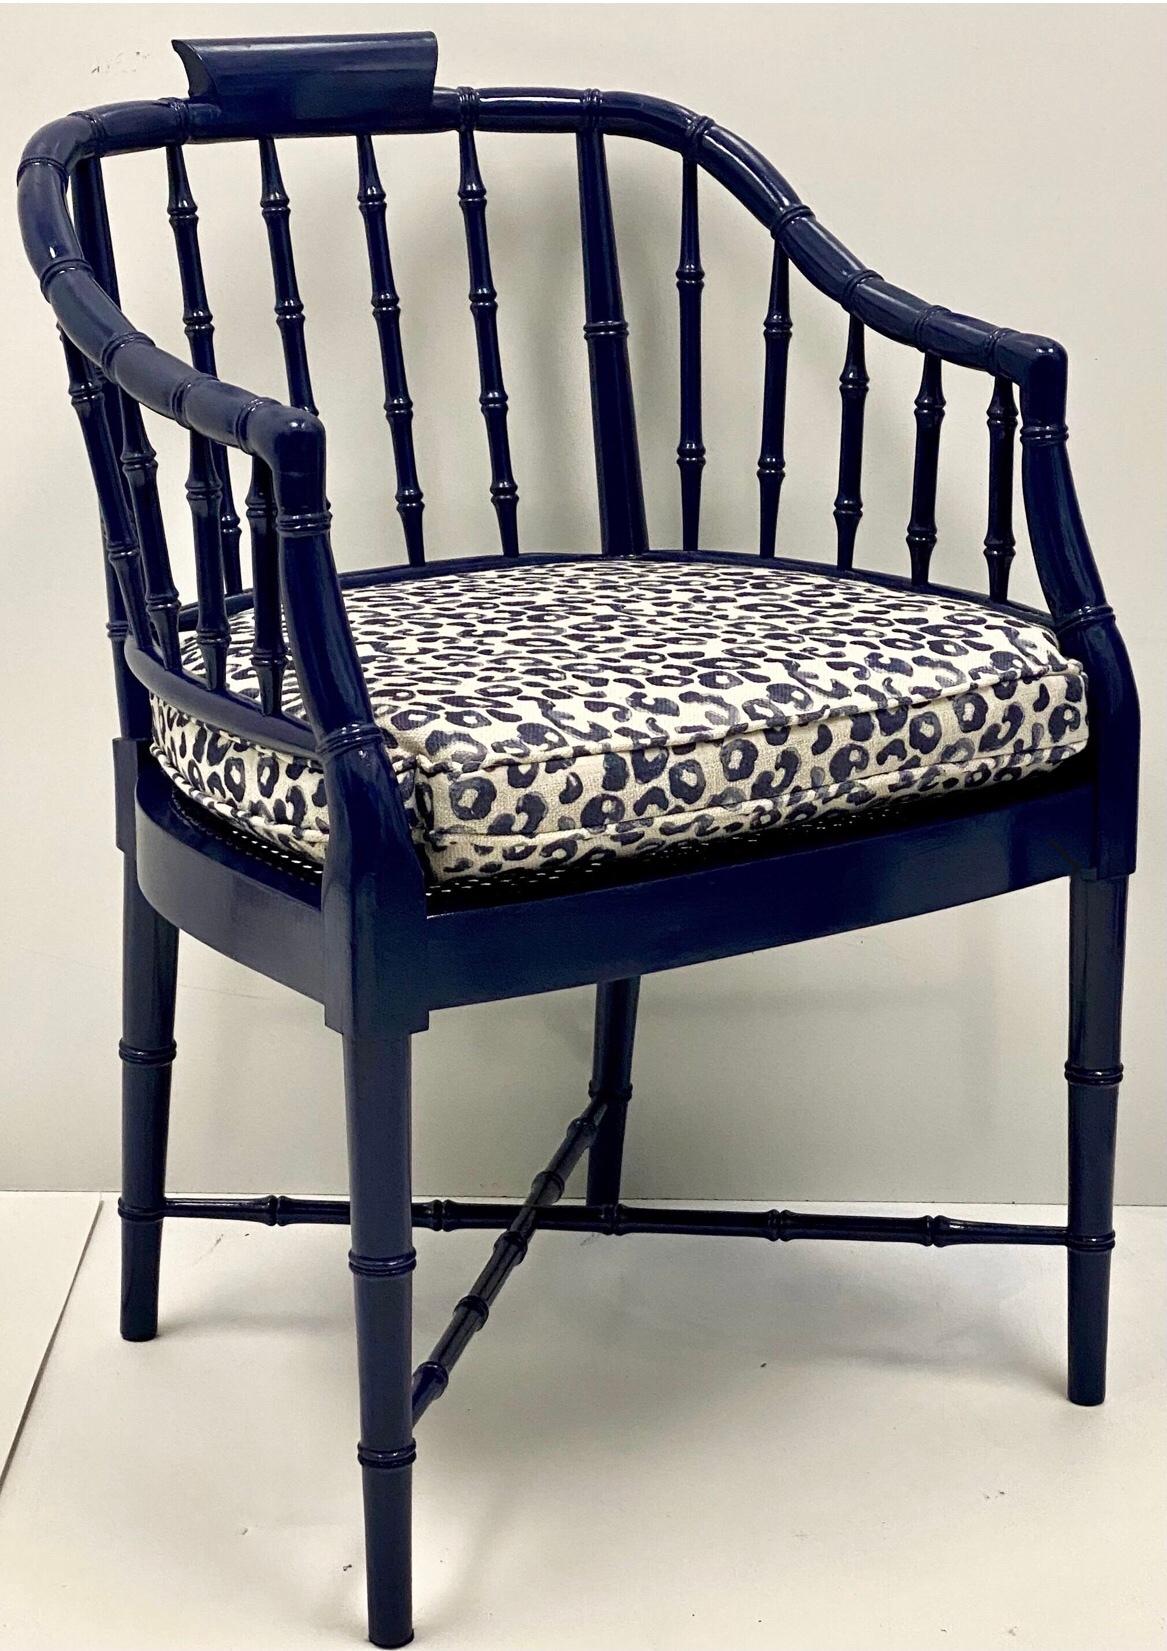 This is a pair of 1970s navy lacquered faux bamboo barrel chairs with leopard fabric cushions. The upholstery is recent, and they are in very good condition.